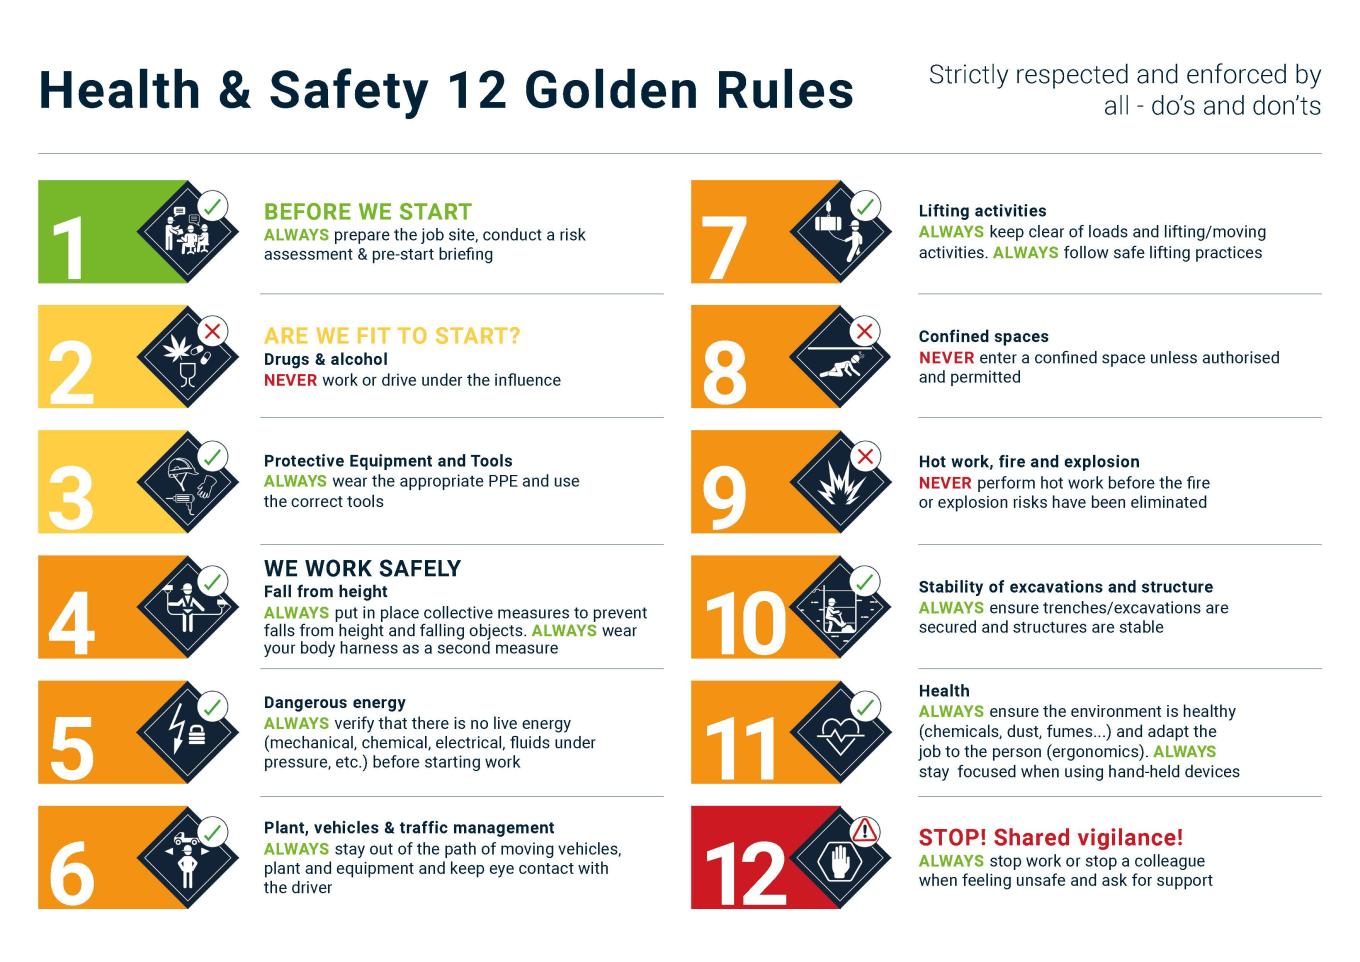 Health and Safety 12 Golden Rules image